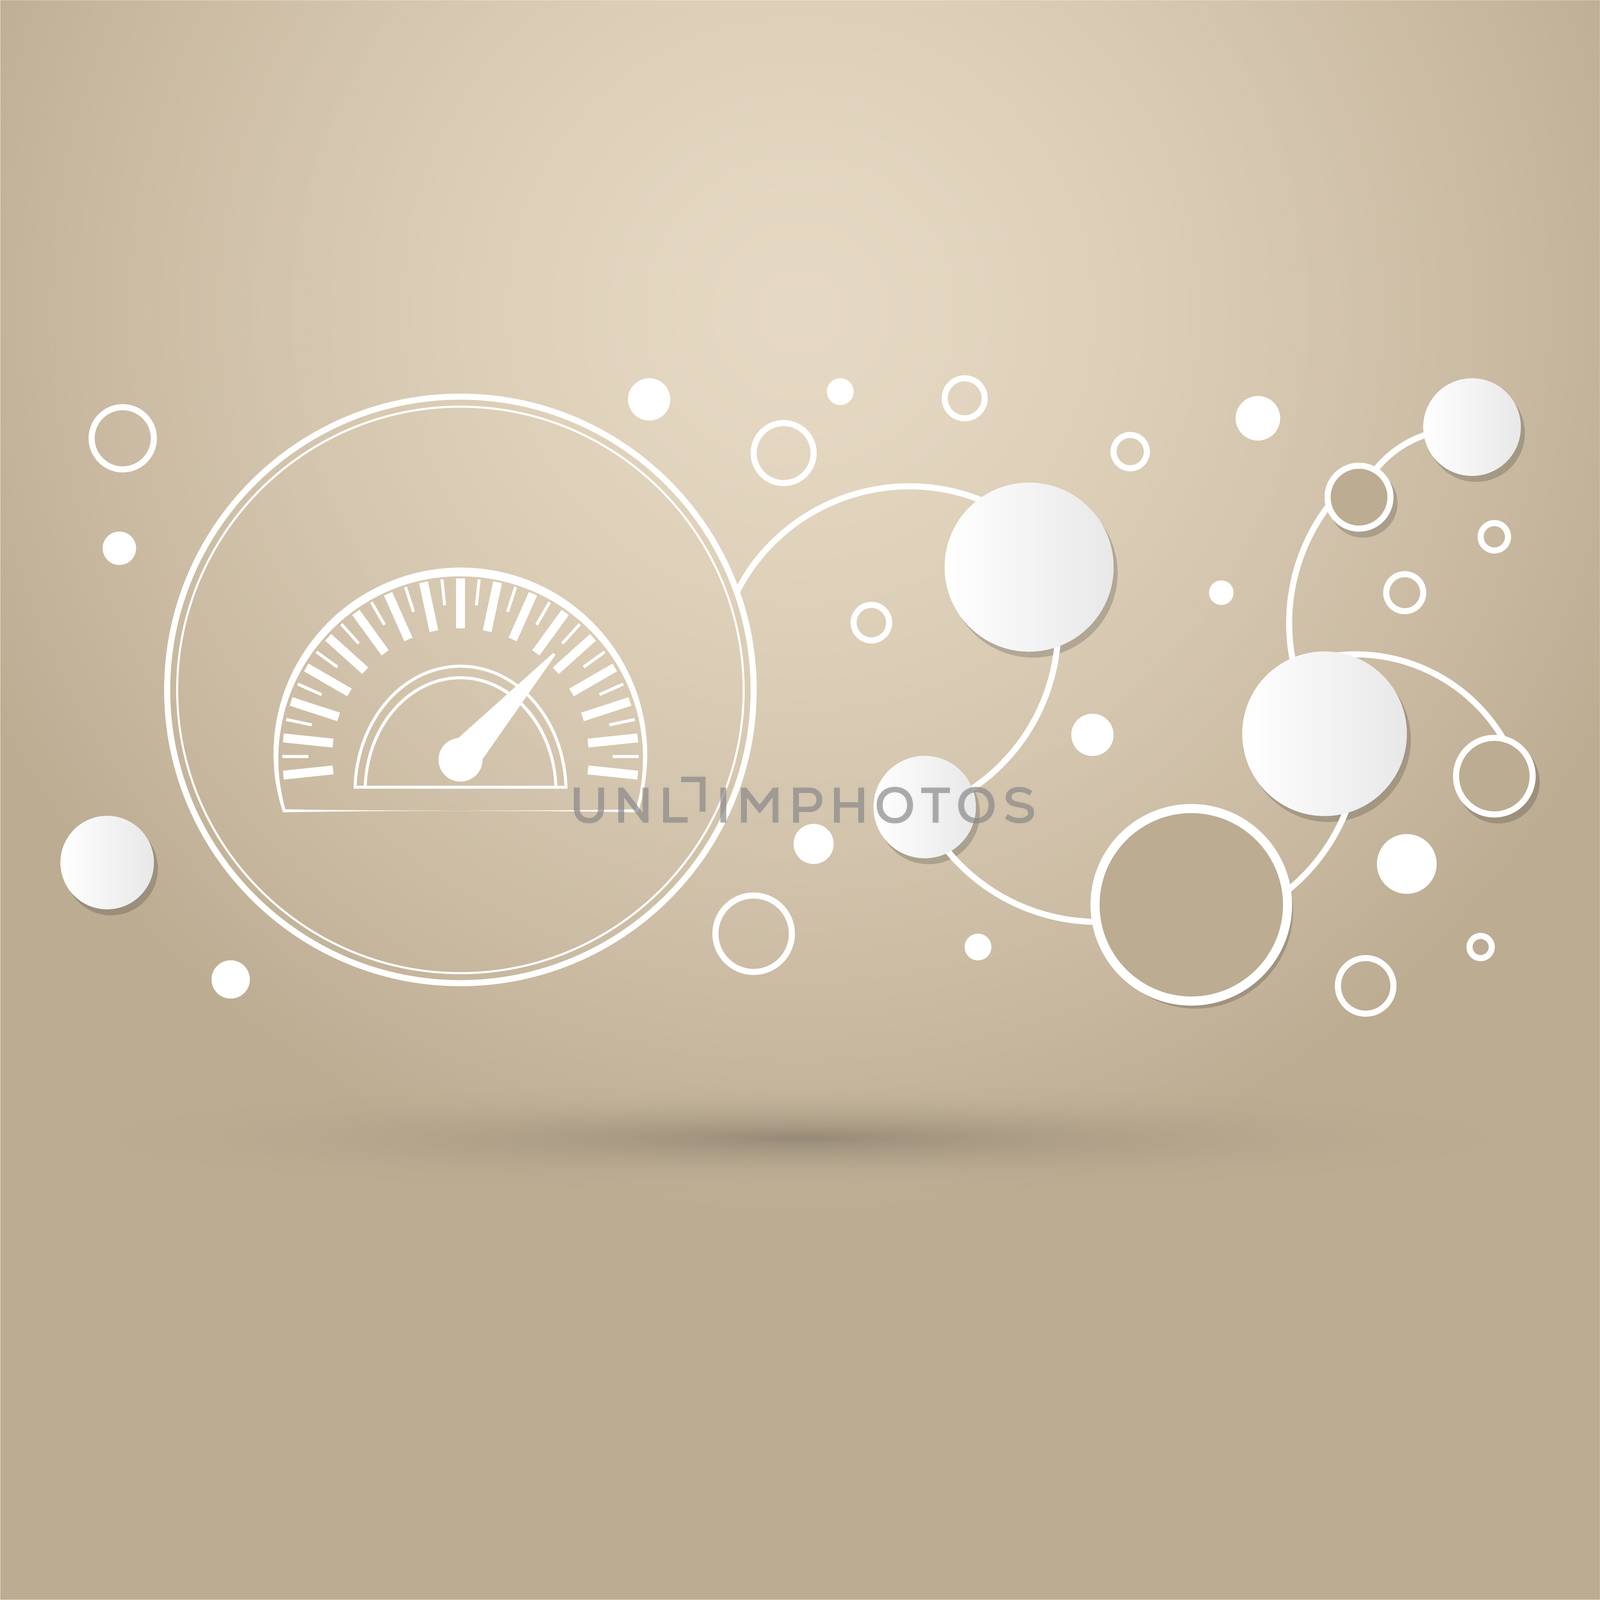 Speedometer icon on a brown background with elegant style and modern design infographic.  by Adamchuk